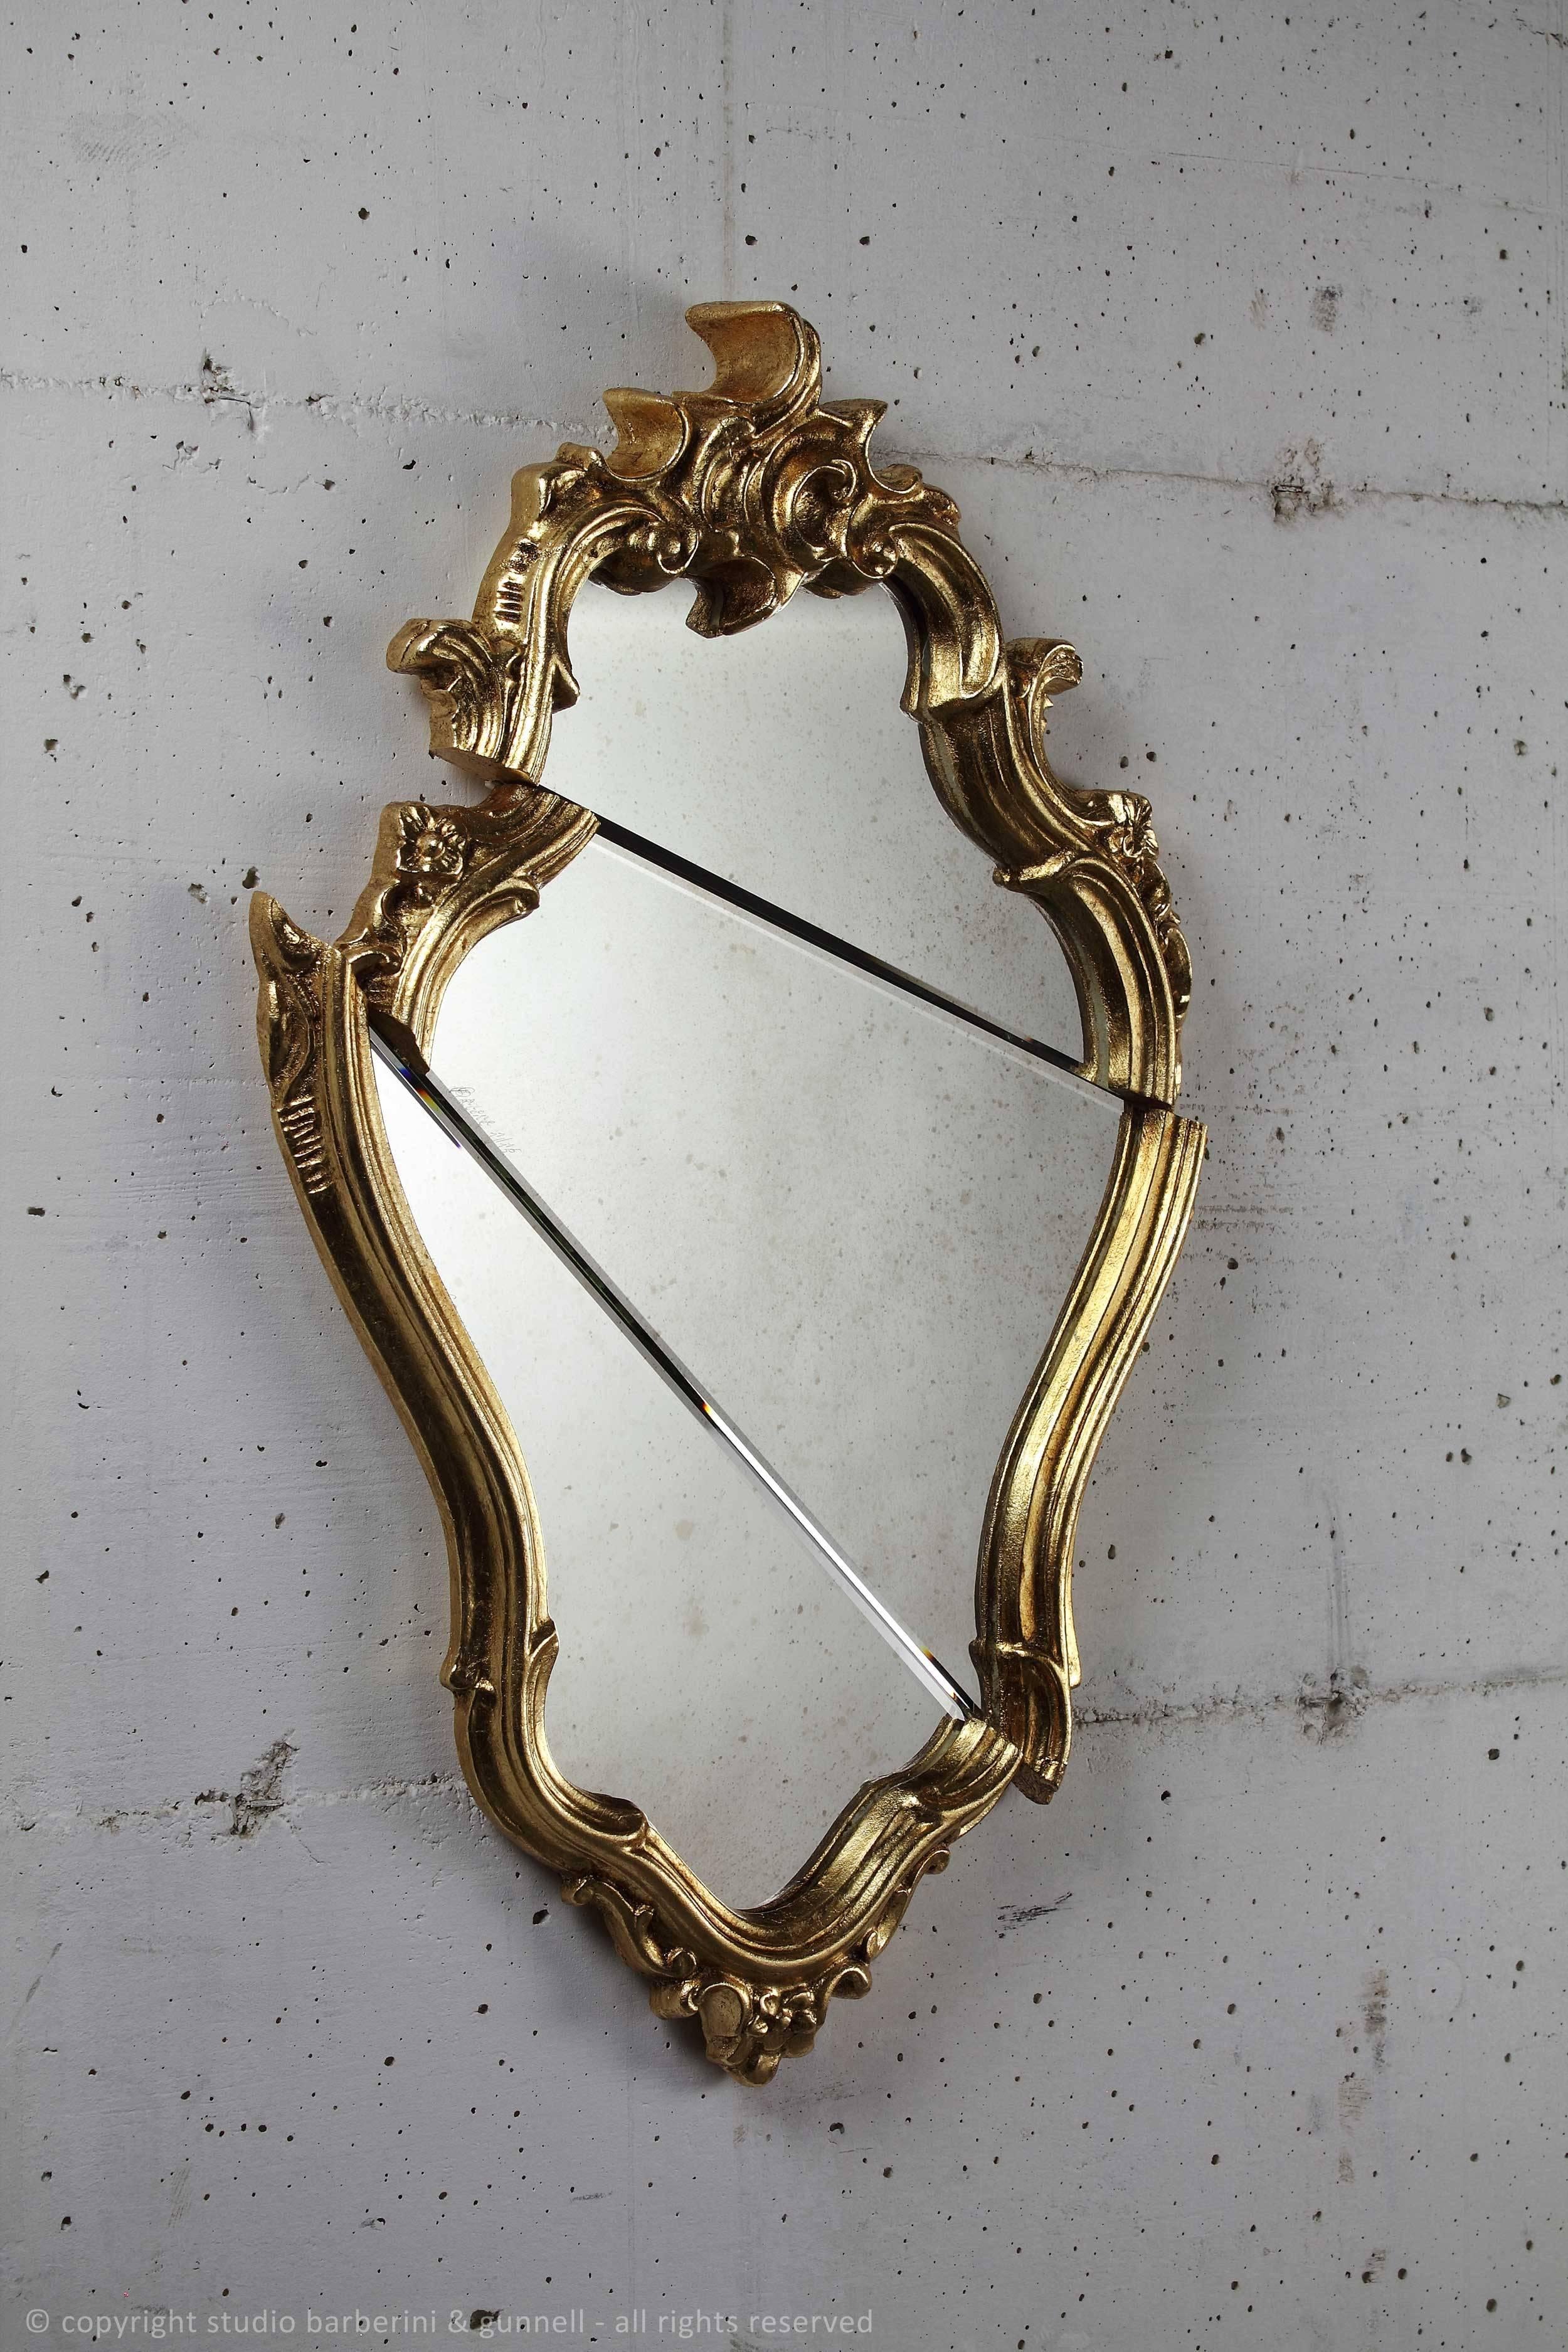 Rococut 'Barone'. Series of mirrors called 'Rococut' made up of four different mirrors. Each mirror has its own aristocratic name and comes in a limited edition of 15. 
The Rococut mirror has frame in gold-plated wood and an antiquate mirror (origin